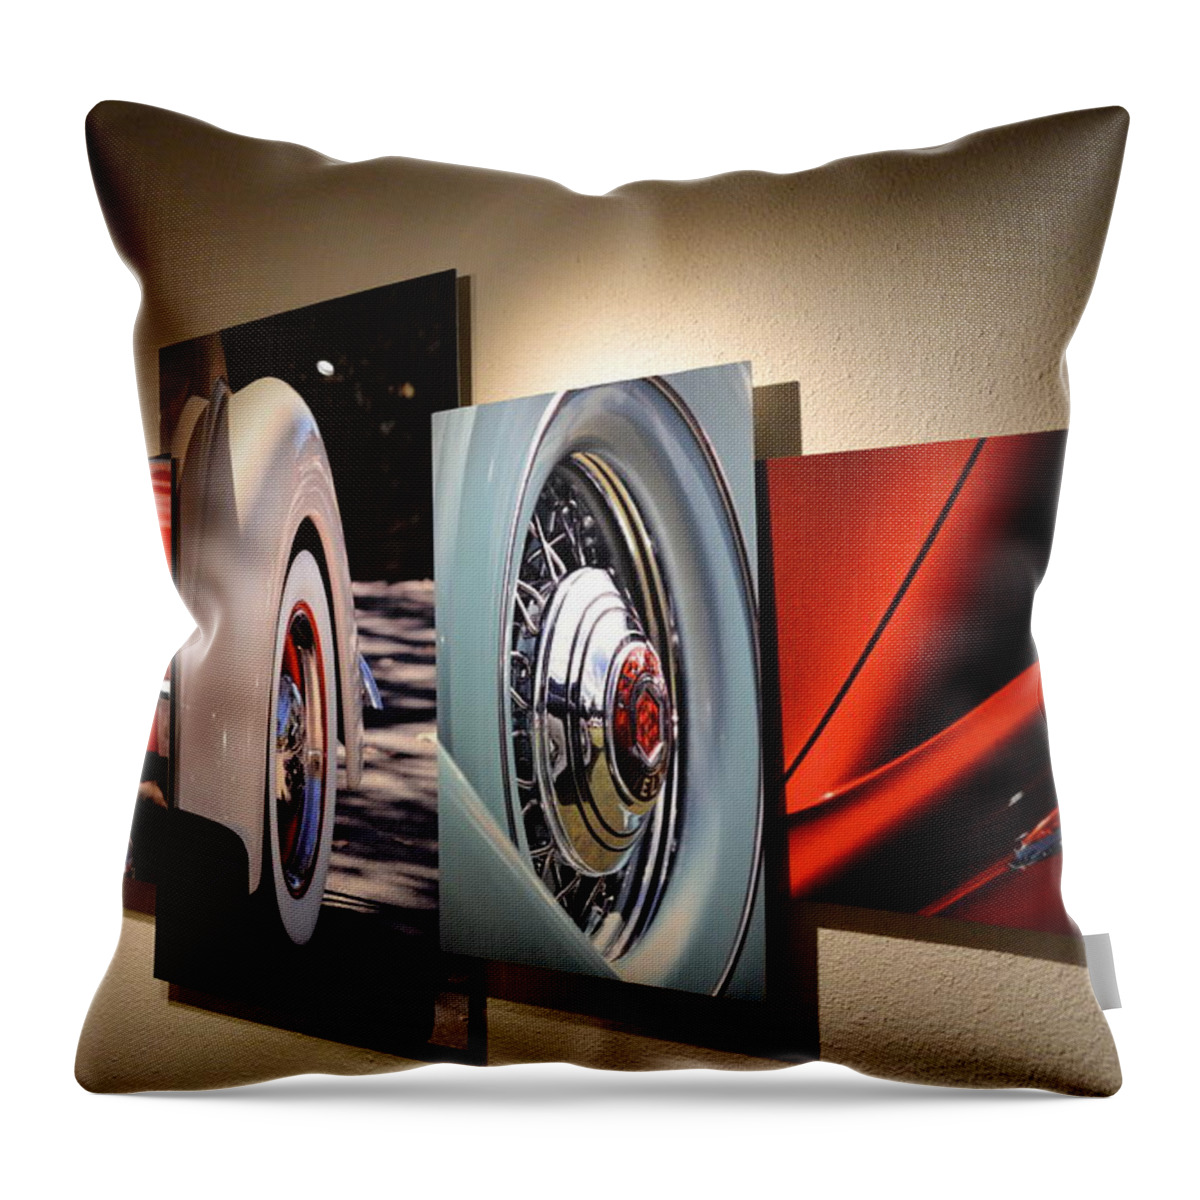  Throw Pillow featuring the photograph My Art on the wall by Dean Ferreira